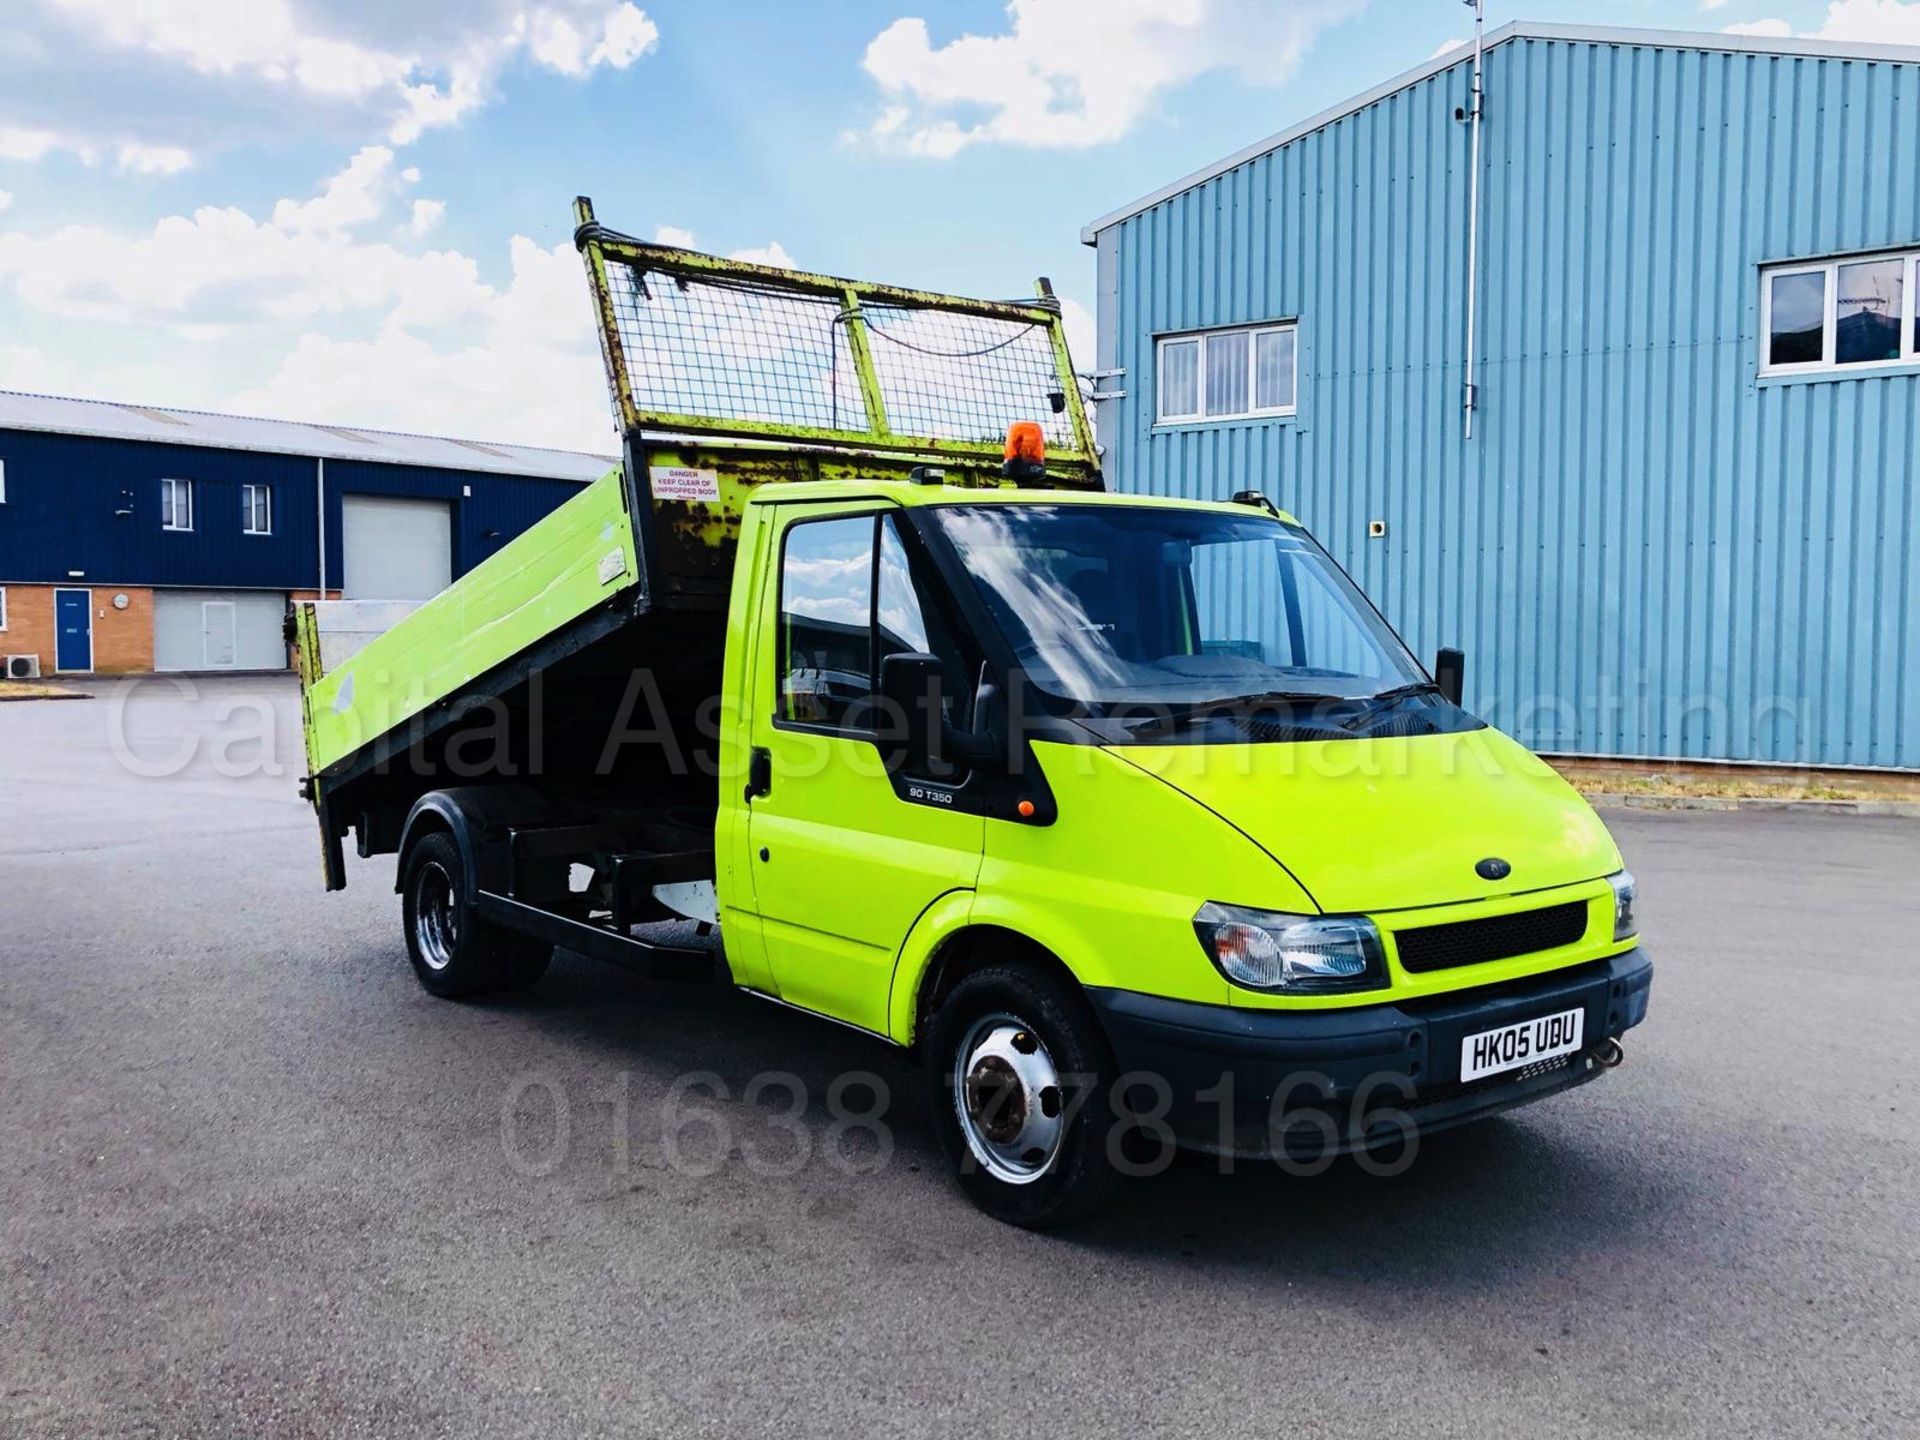 (On Sale) FORD TRANSIT 90 T350 'SINGLE CAB - TIPPER' (2005) '2.4 TDCI -90 BHP - 5 SPEED' *LOW MILES*